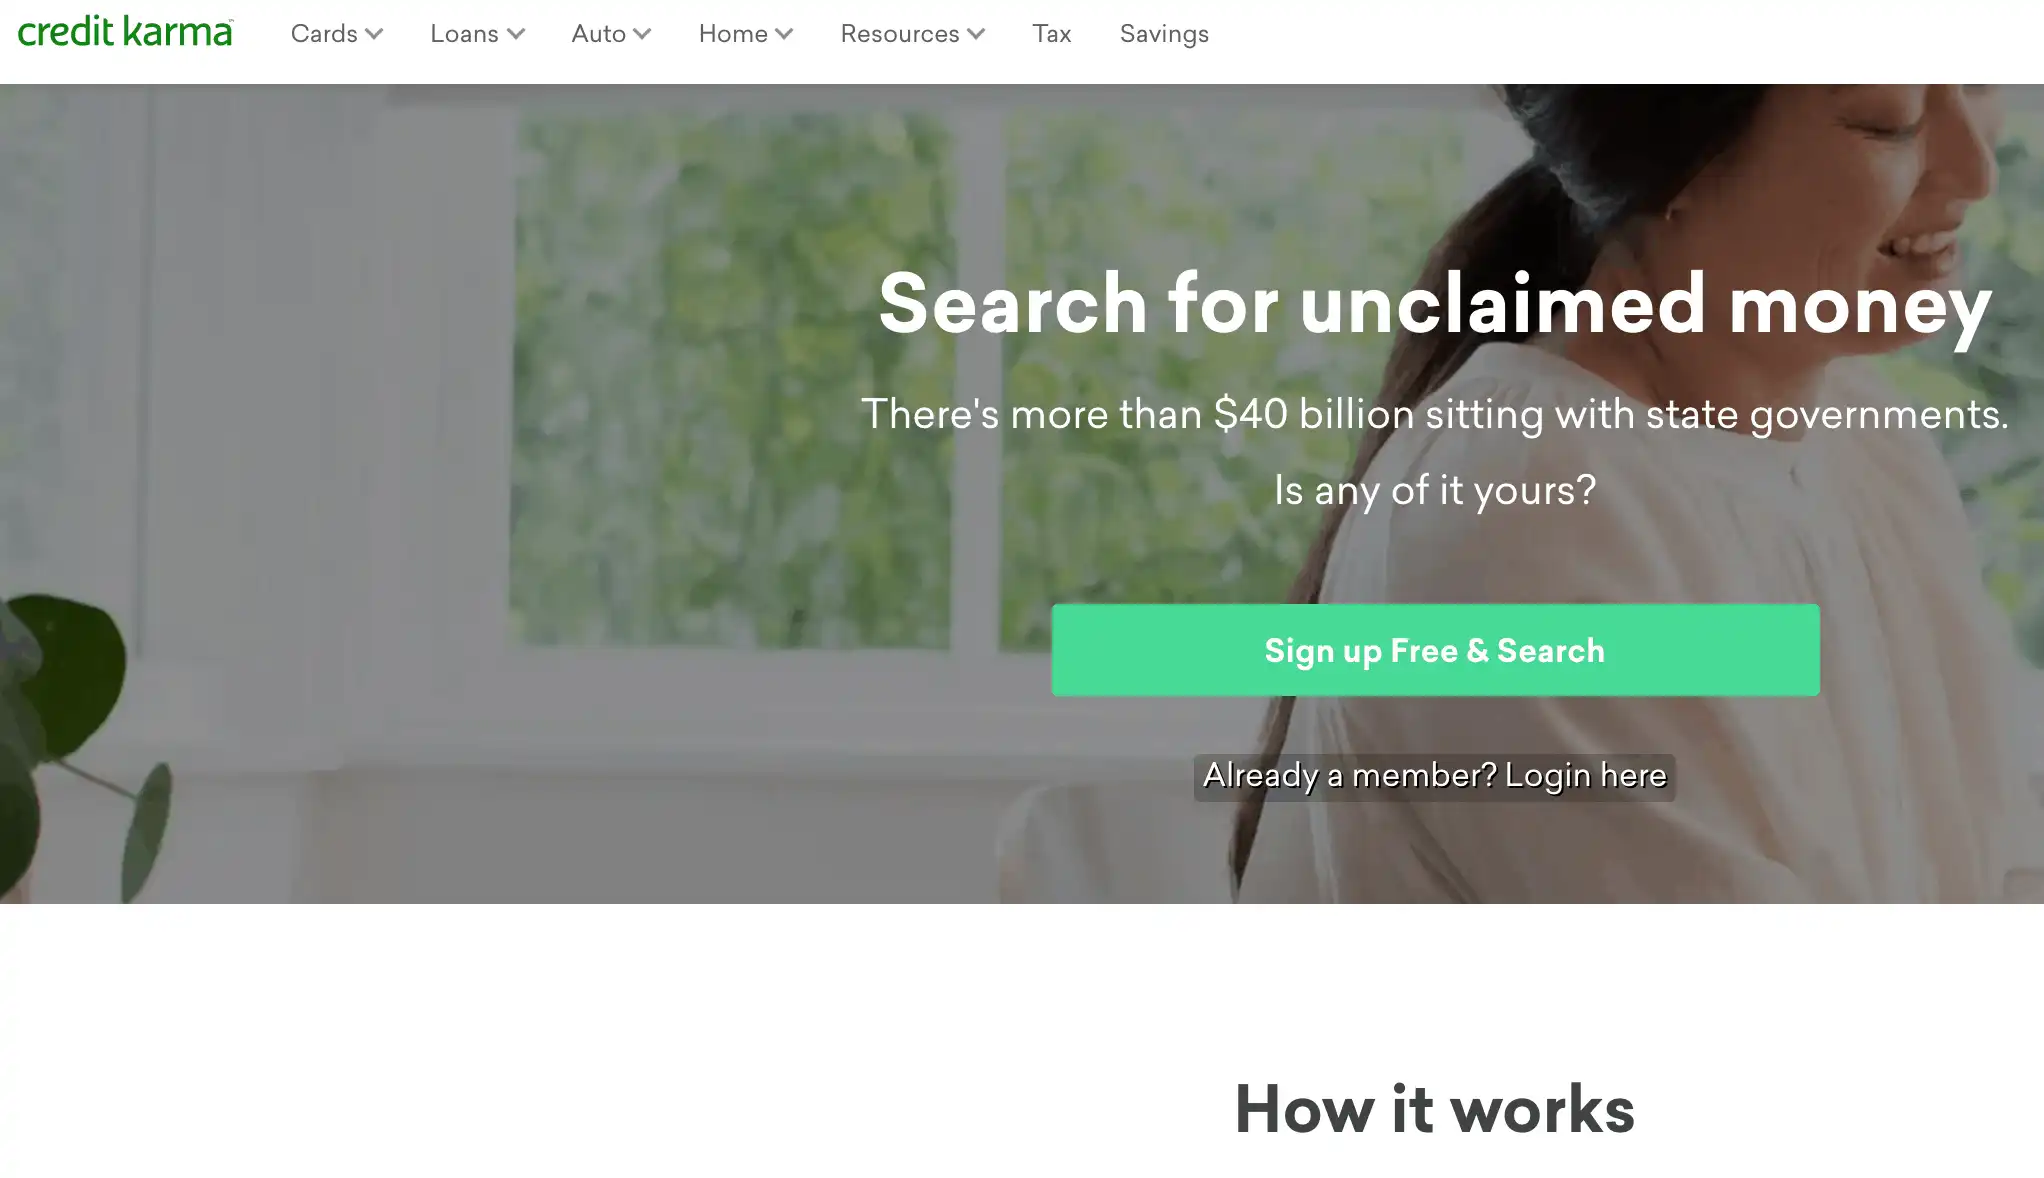 Credit Karma - Unclaimed Money & Unclaimed Property Search